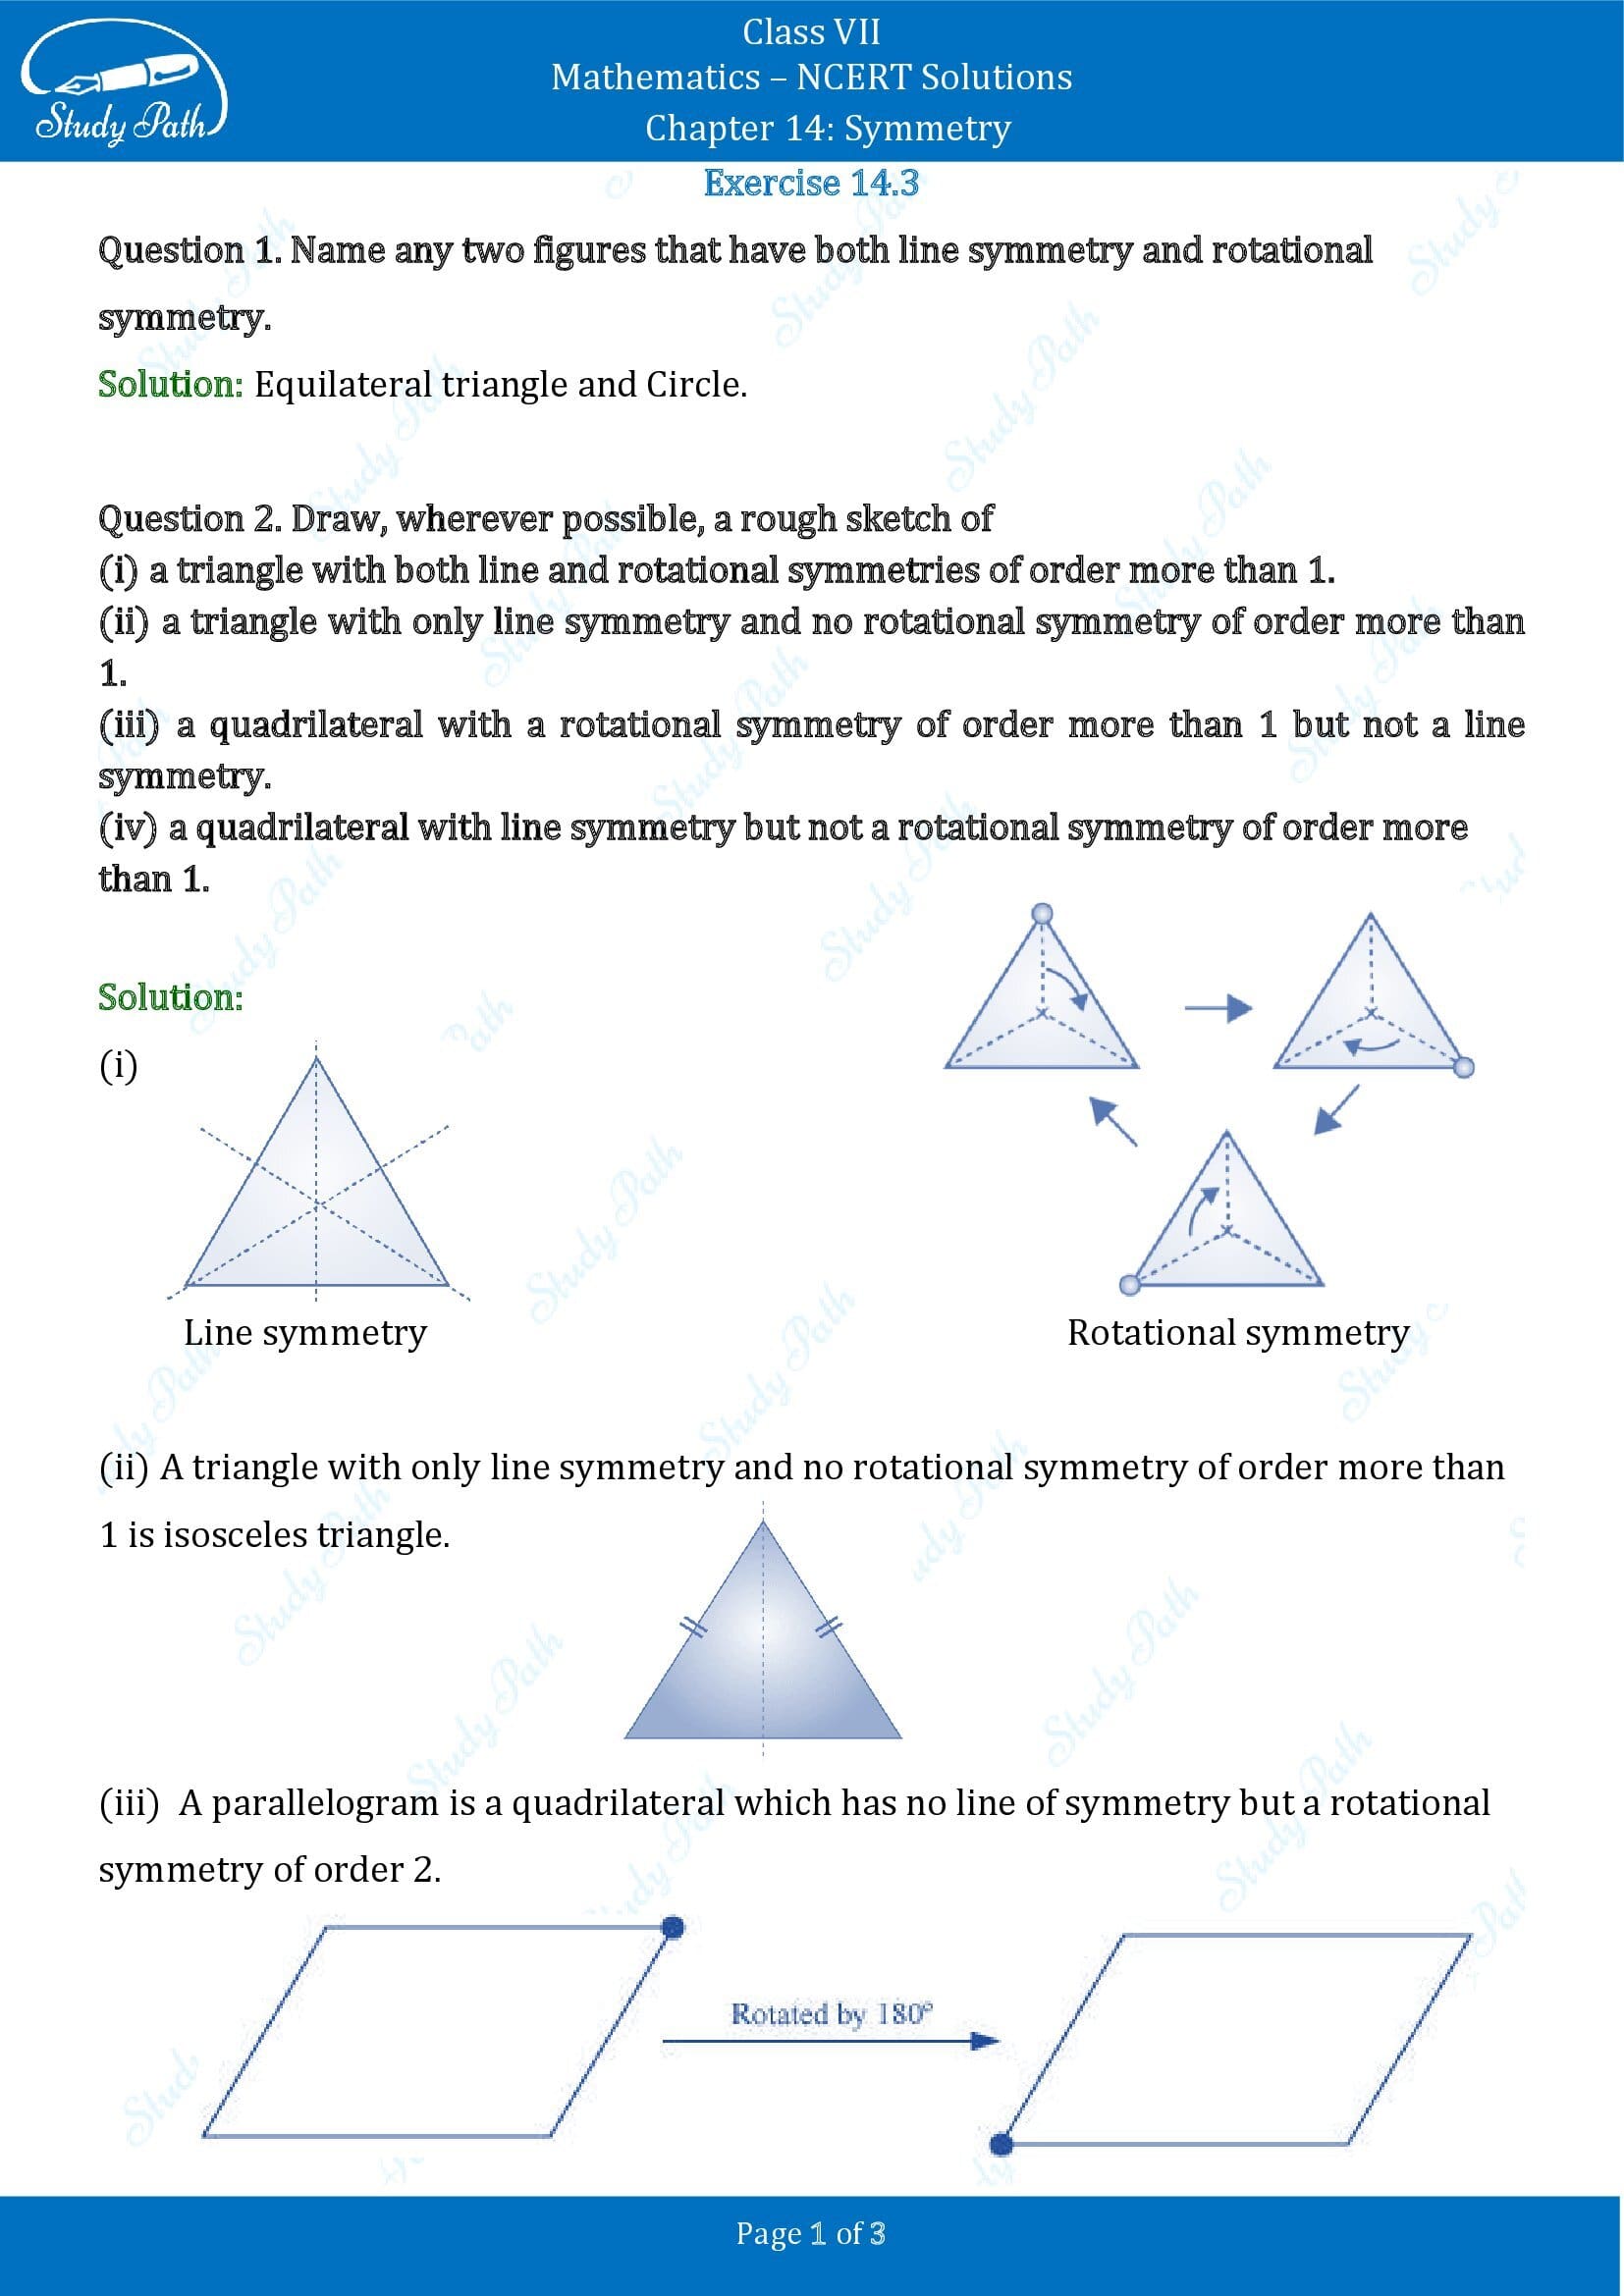 NCERT Solutions for Class 7 Maths Chapter 14 Symmetry Exercise 14.3 00001